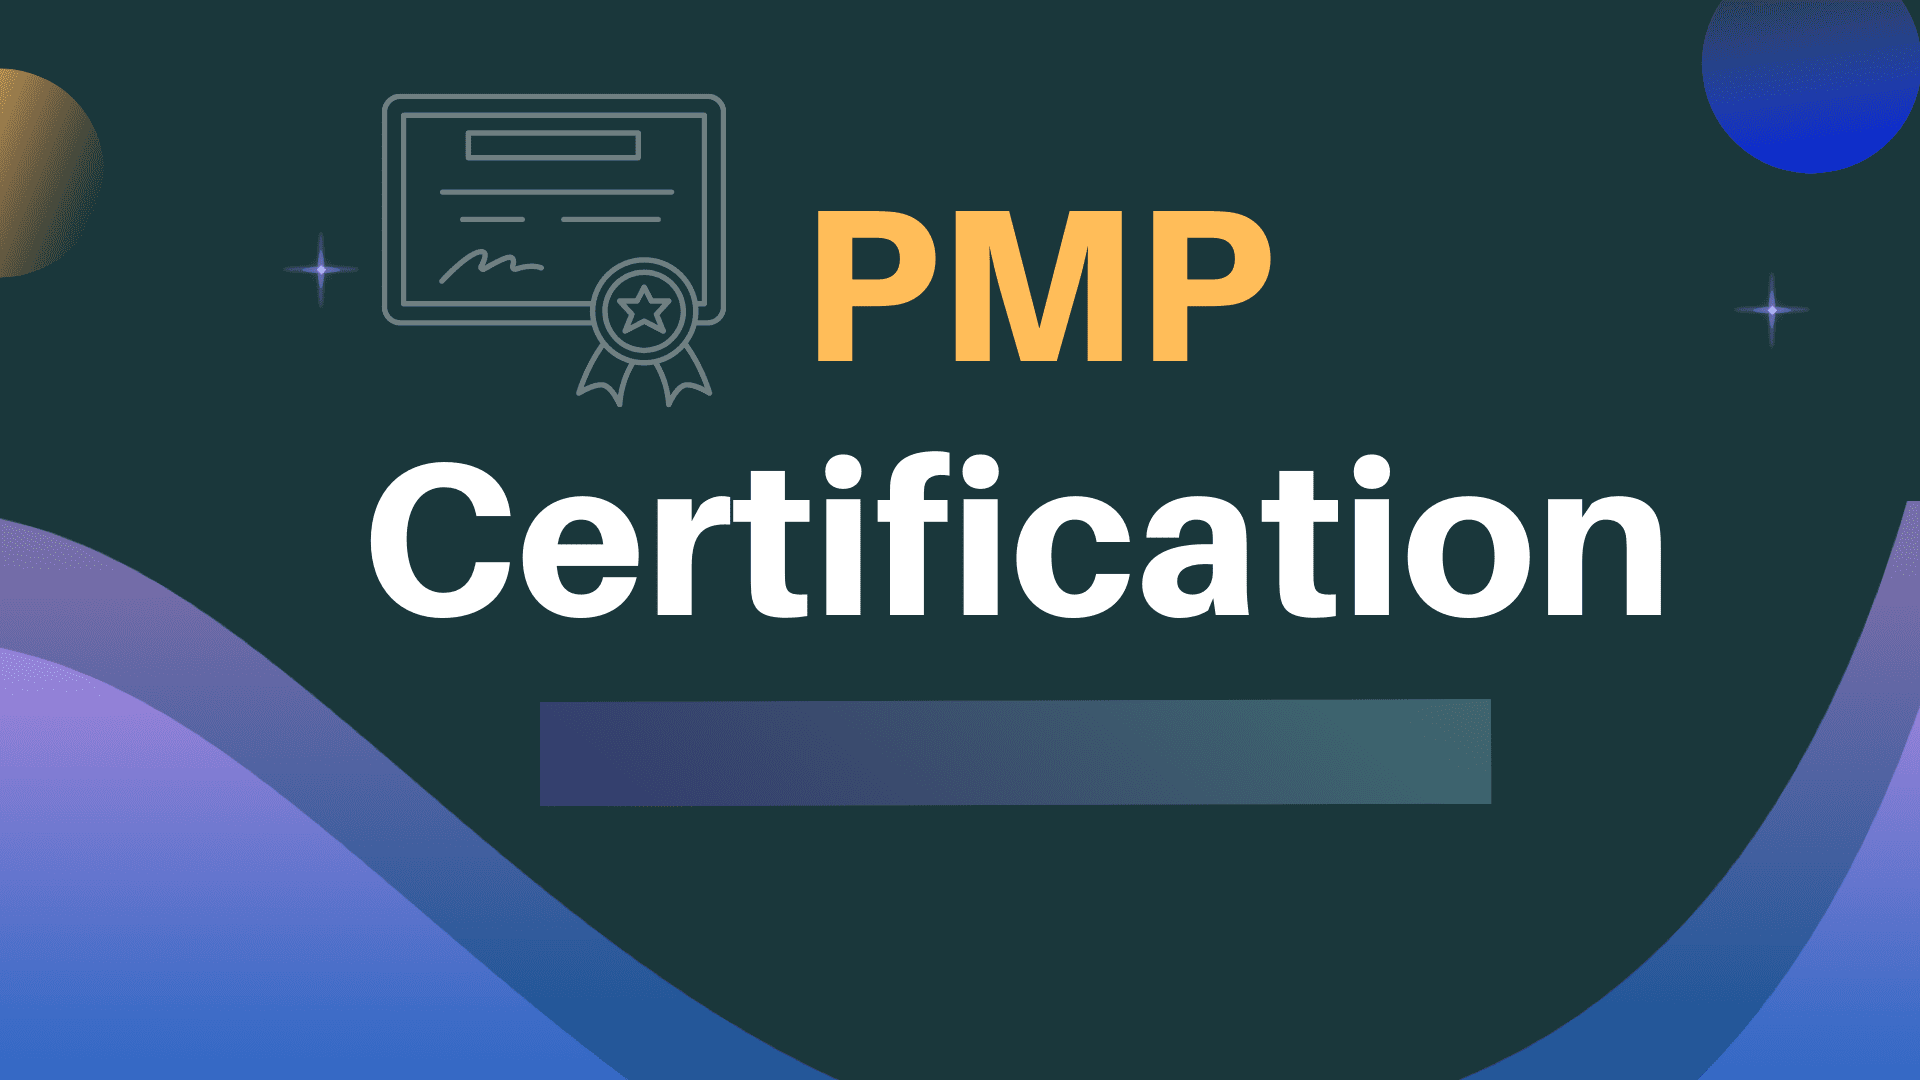 PMP Certification Training in Toronto Canada